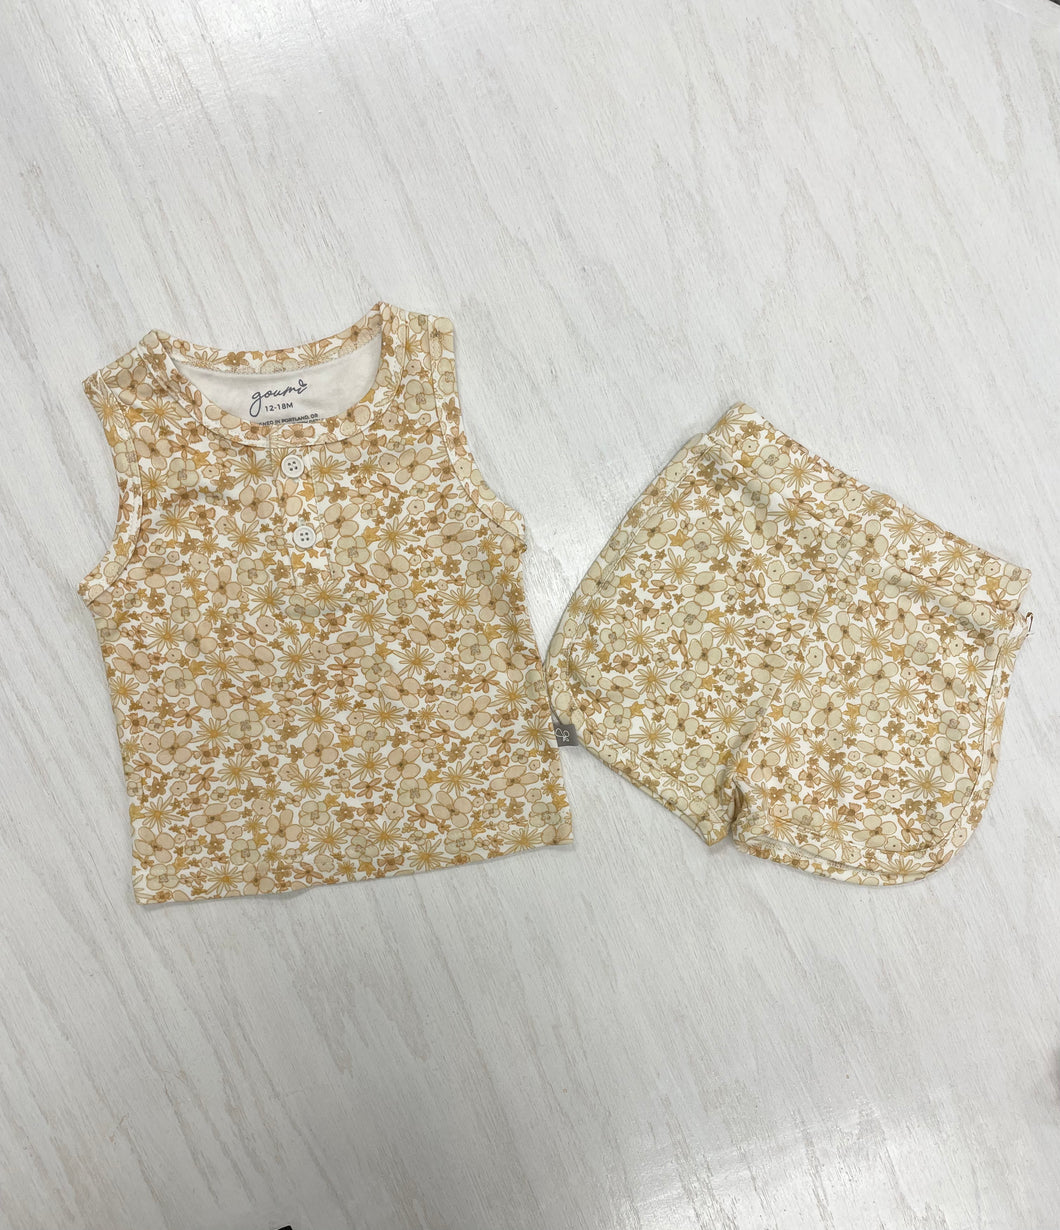 Organic, ethically made 2 piece short/tank top set for girls.